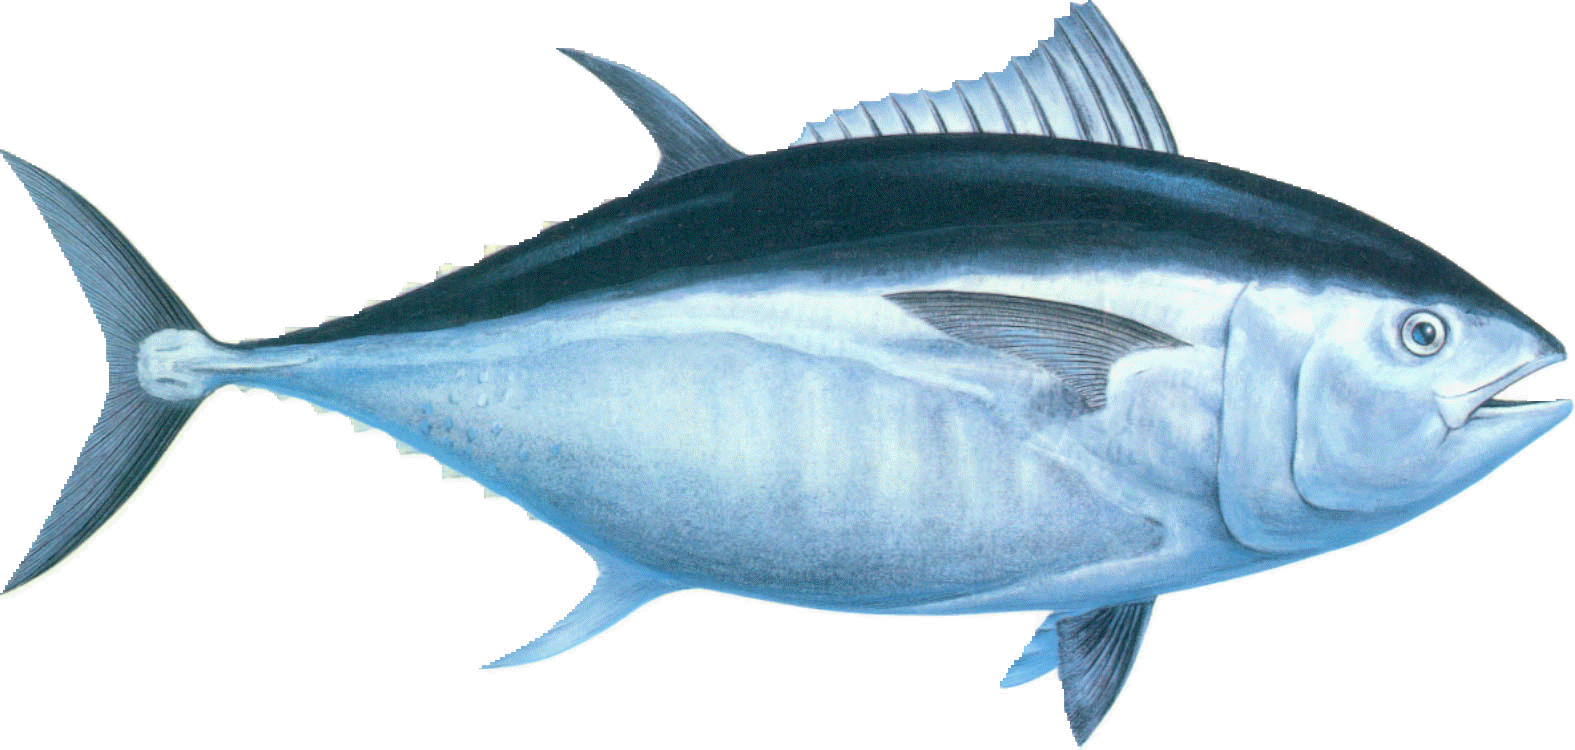 Tuna Meaning and Definition